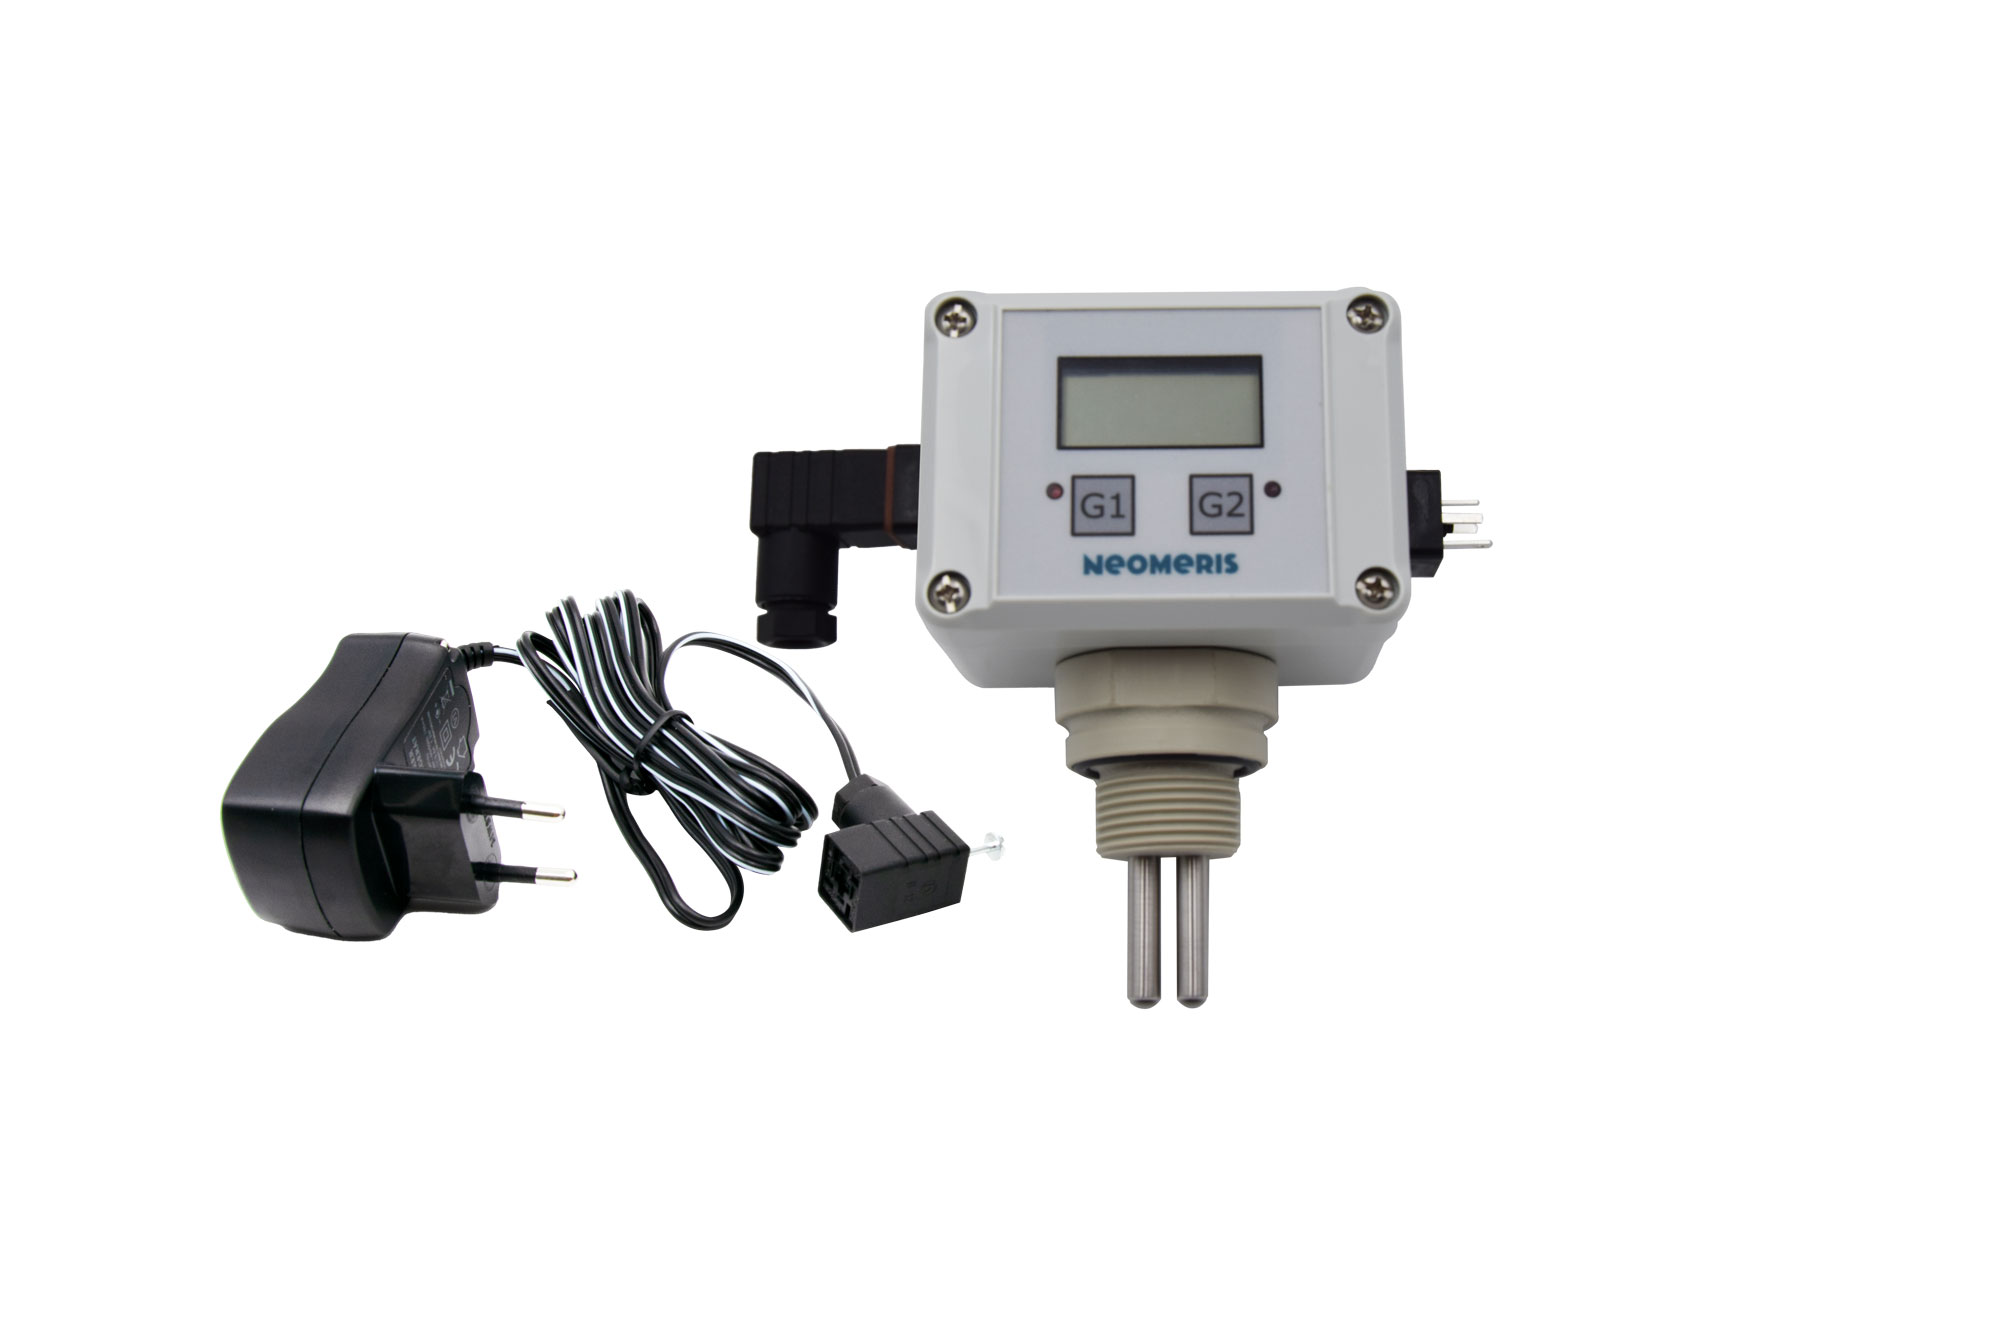 N-LF100R conductivity meter with relay output 0-100 µS - integrated 3/4" screw-in measuring cell